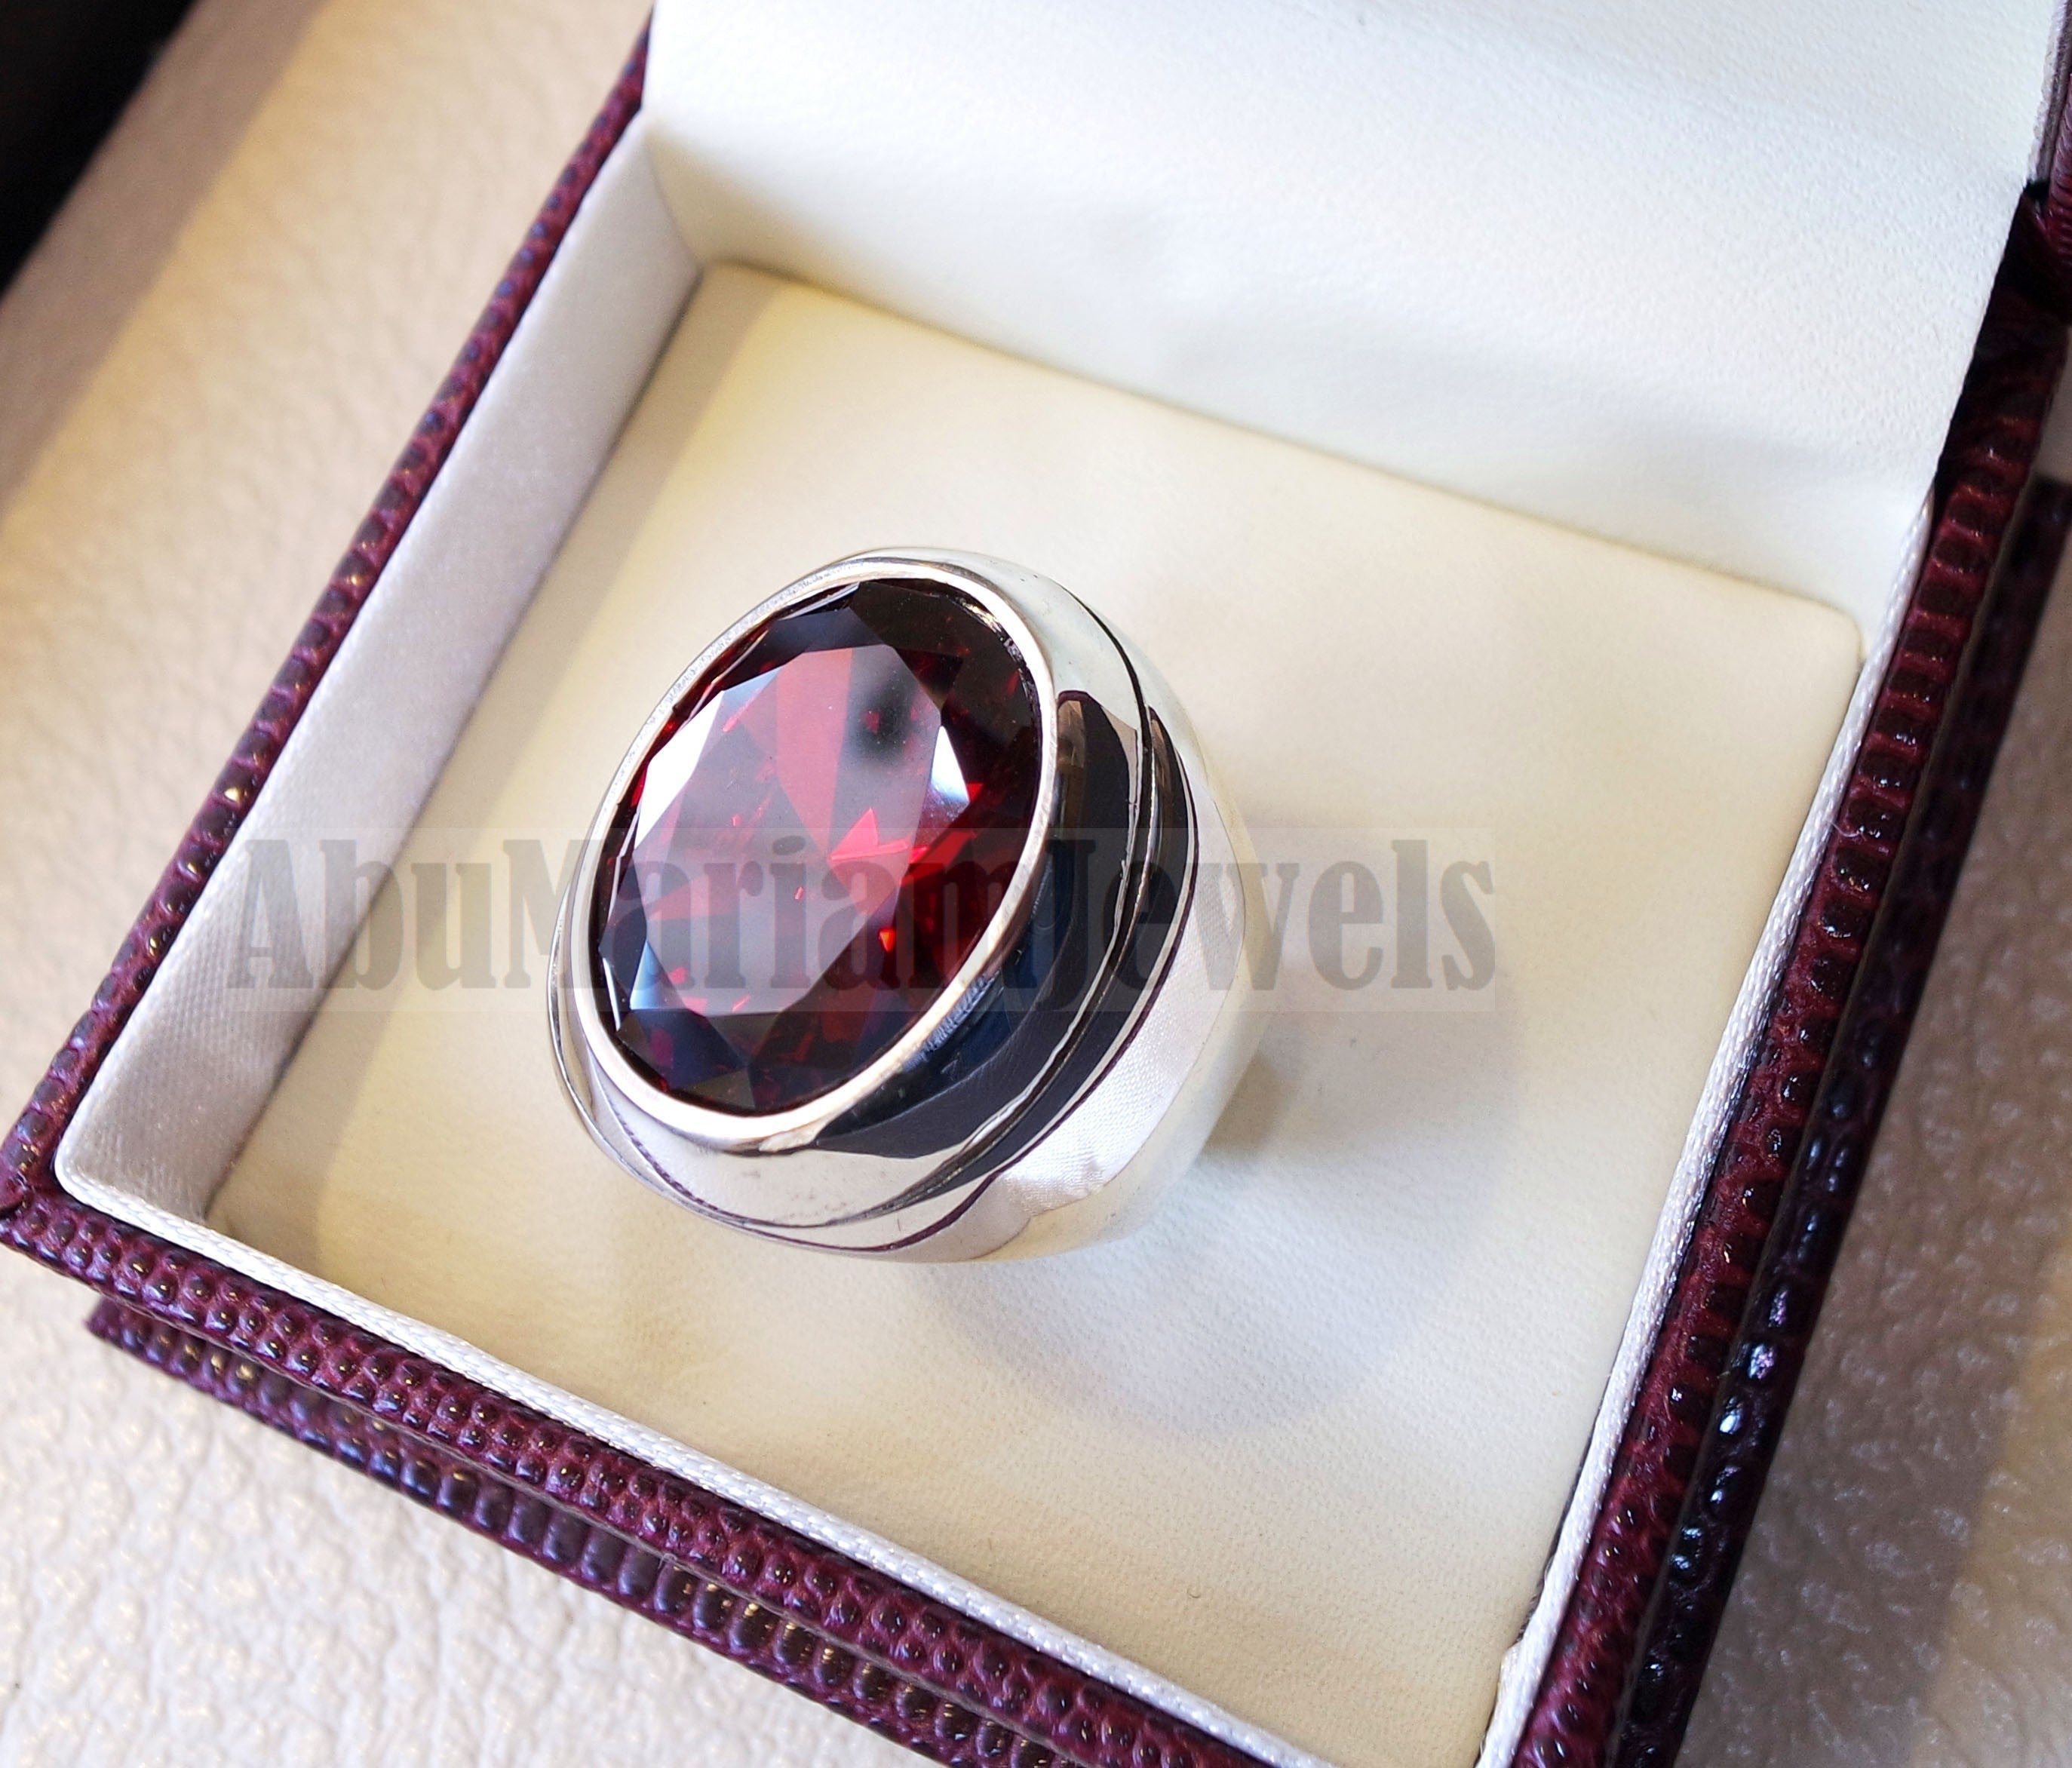 garnet identical synthetic stone high quality cubic zircon red color huge heavy men ring sterling silver 925 any size ottoman jewelry